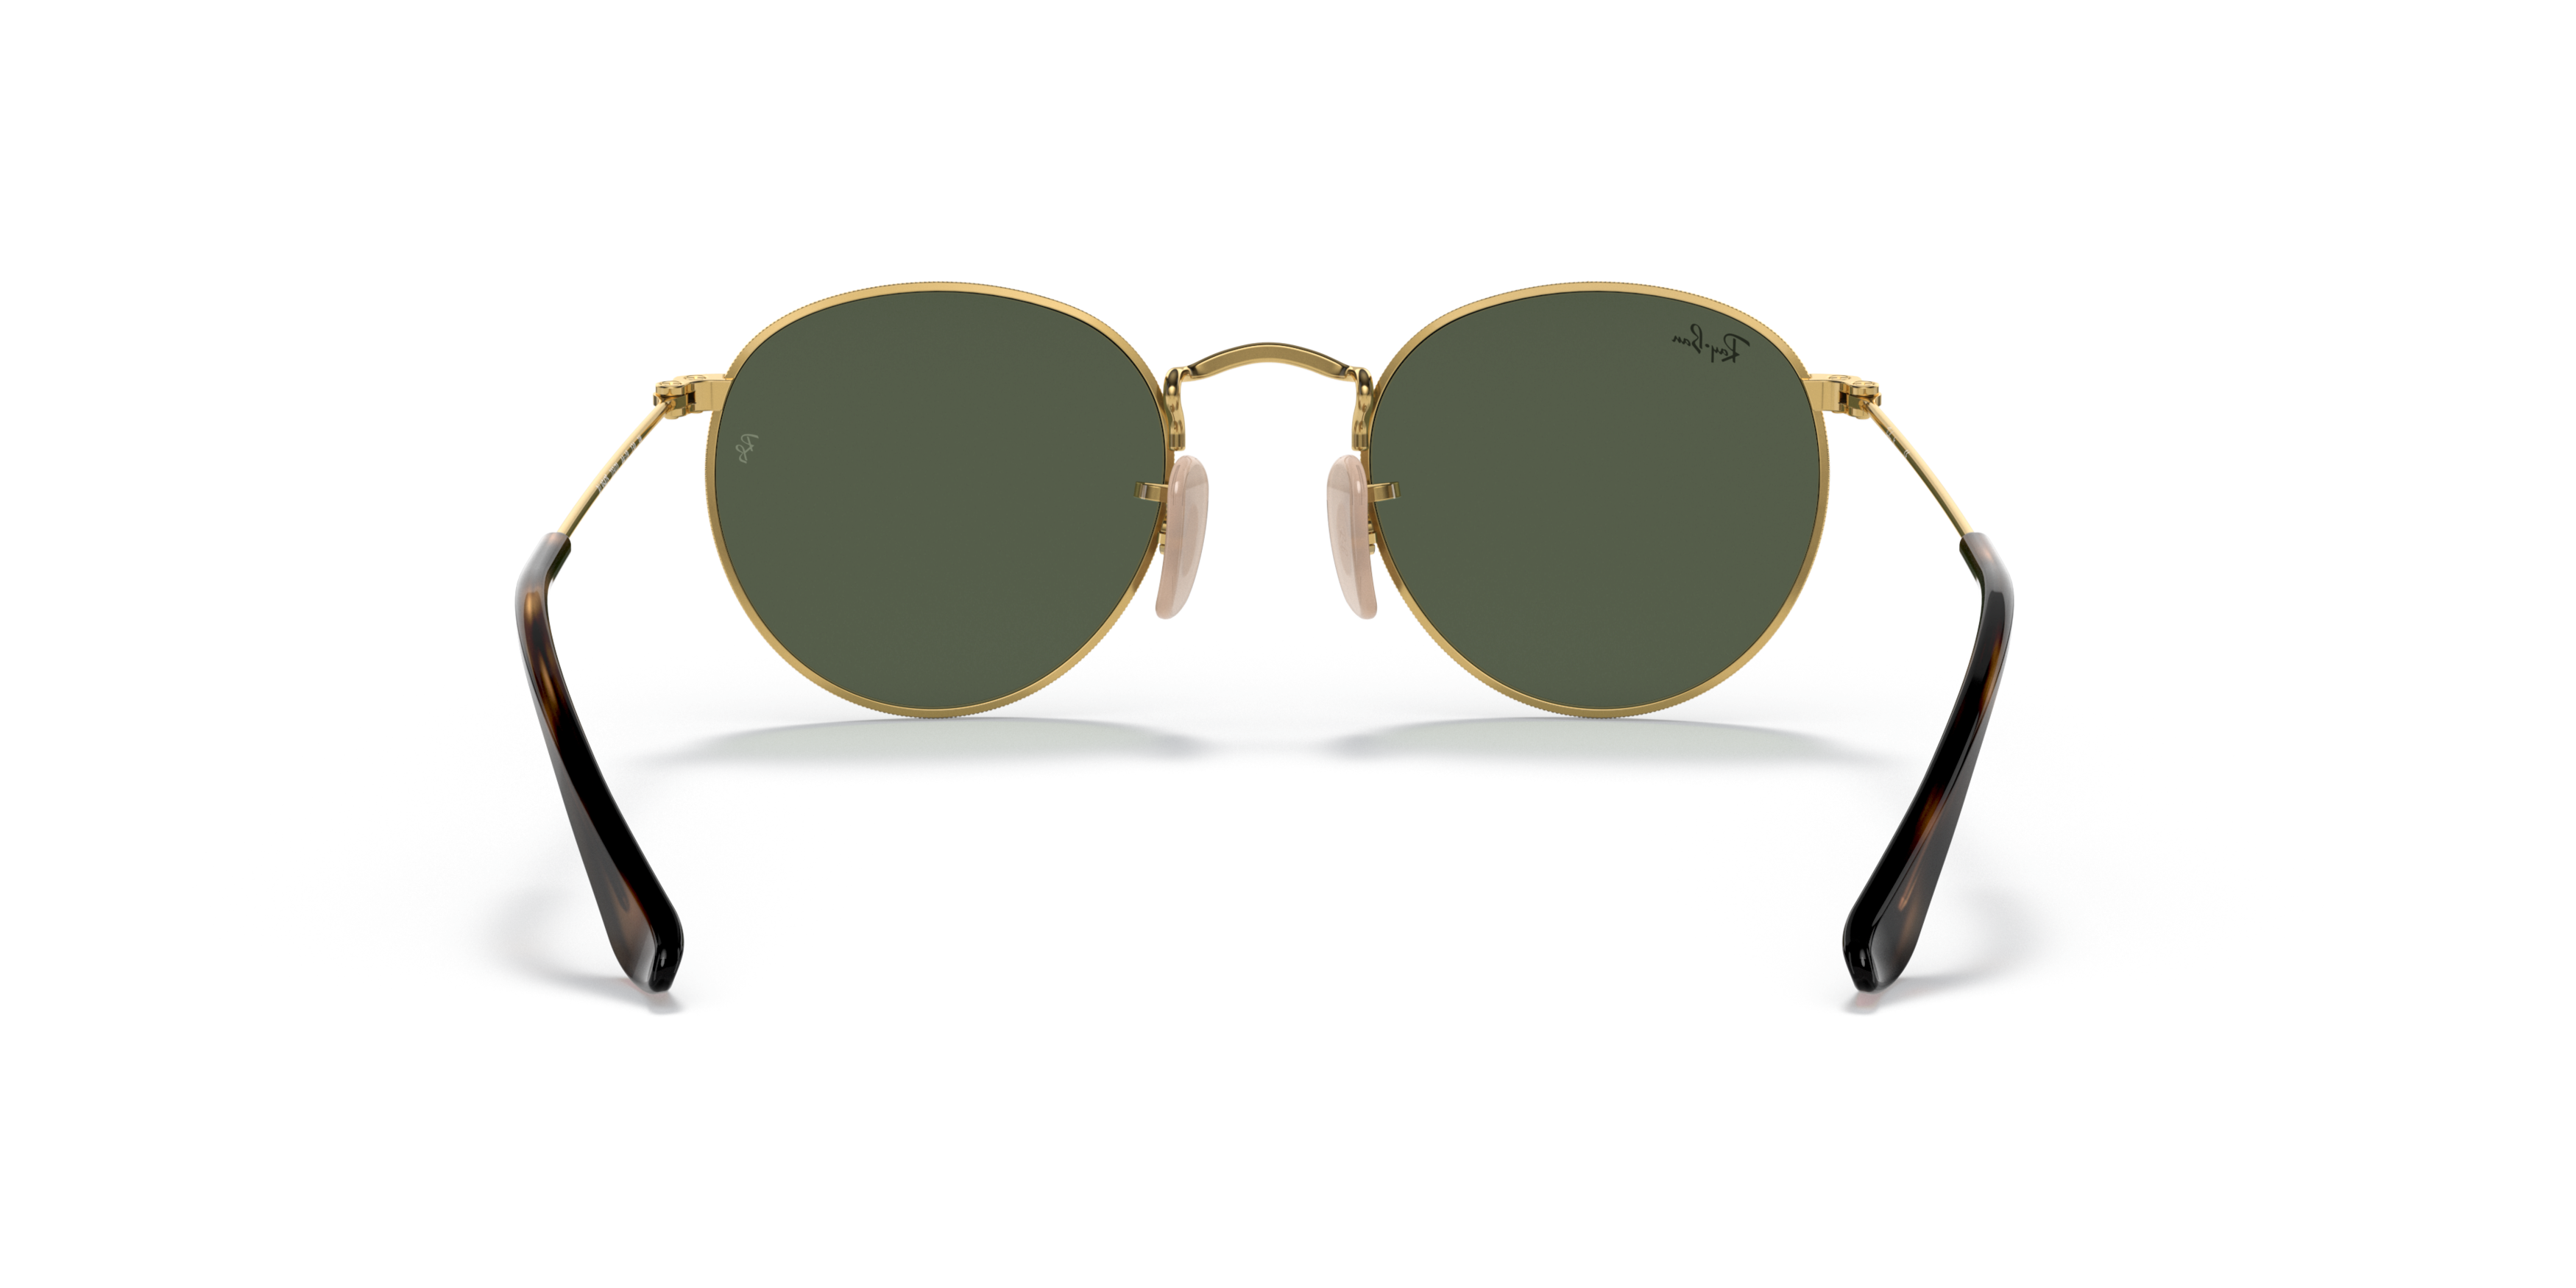 [products.image.detail02] RAY-BAN RJ9547S 223/71